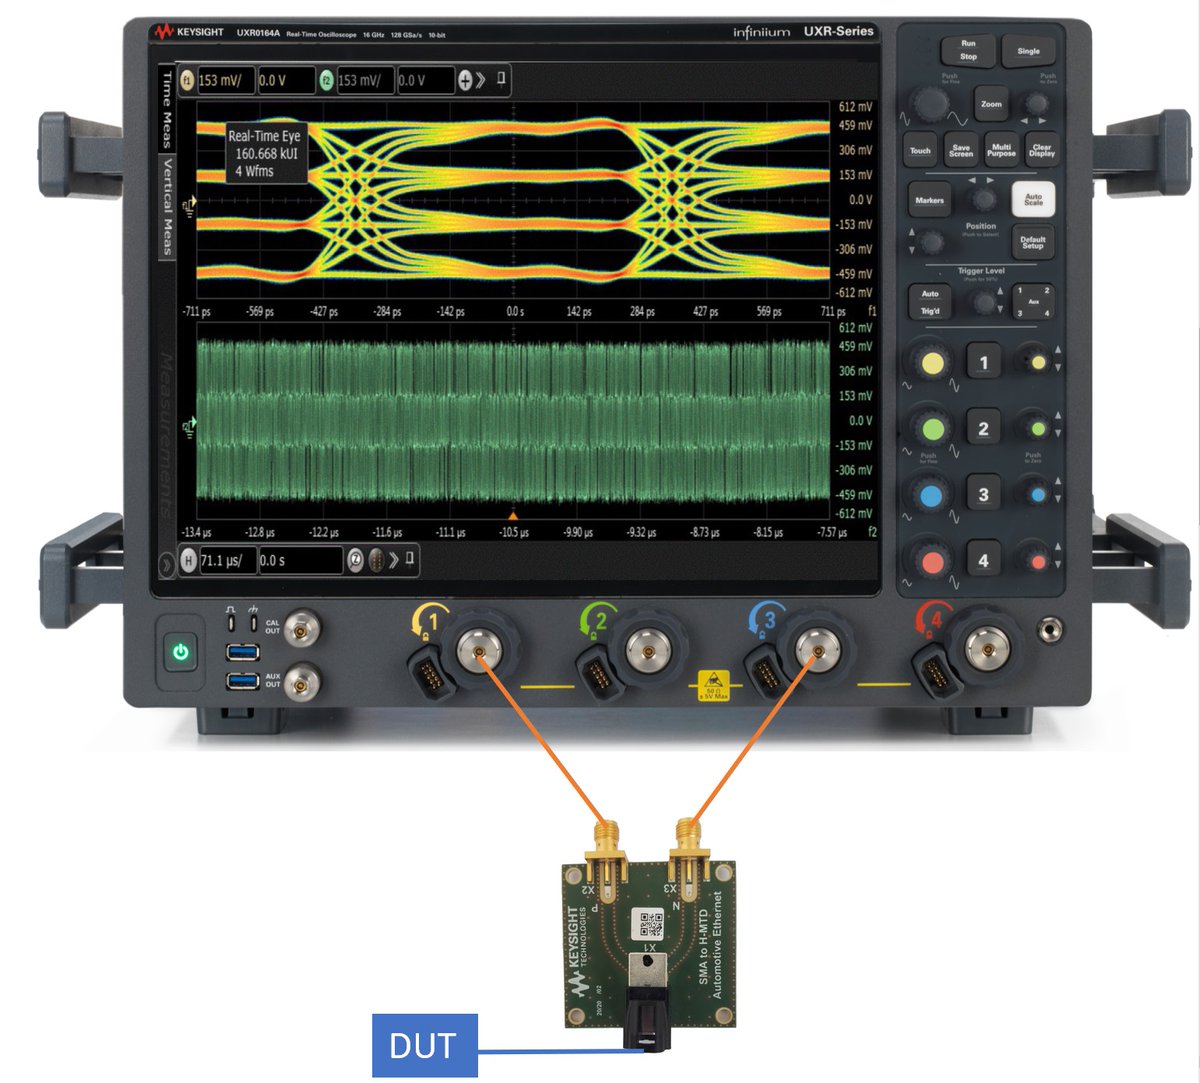 .@Keysight Delivers Multi-gigabit #Automotive Ethernet Test Solutions to Ensure Standard Compliance and Enable Faster Time-to-Market. Expands automotive #Ethernet software portfolio to address multi-gigabit standards that govern #AutomotiveEthernet bit.ly/3ady7Q6 #ADAS